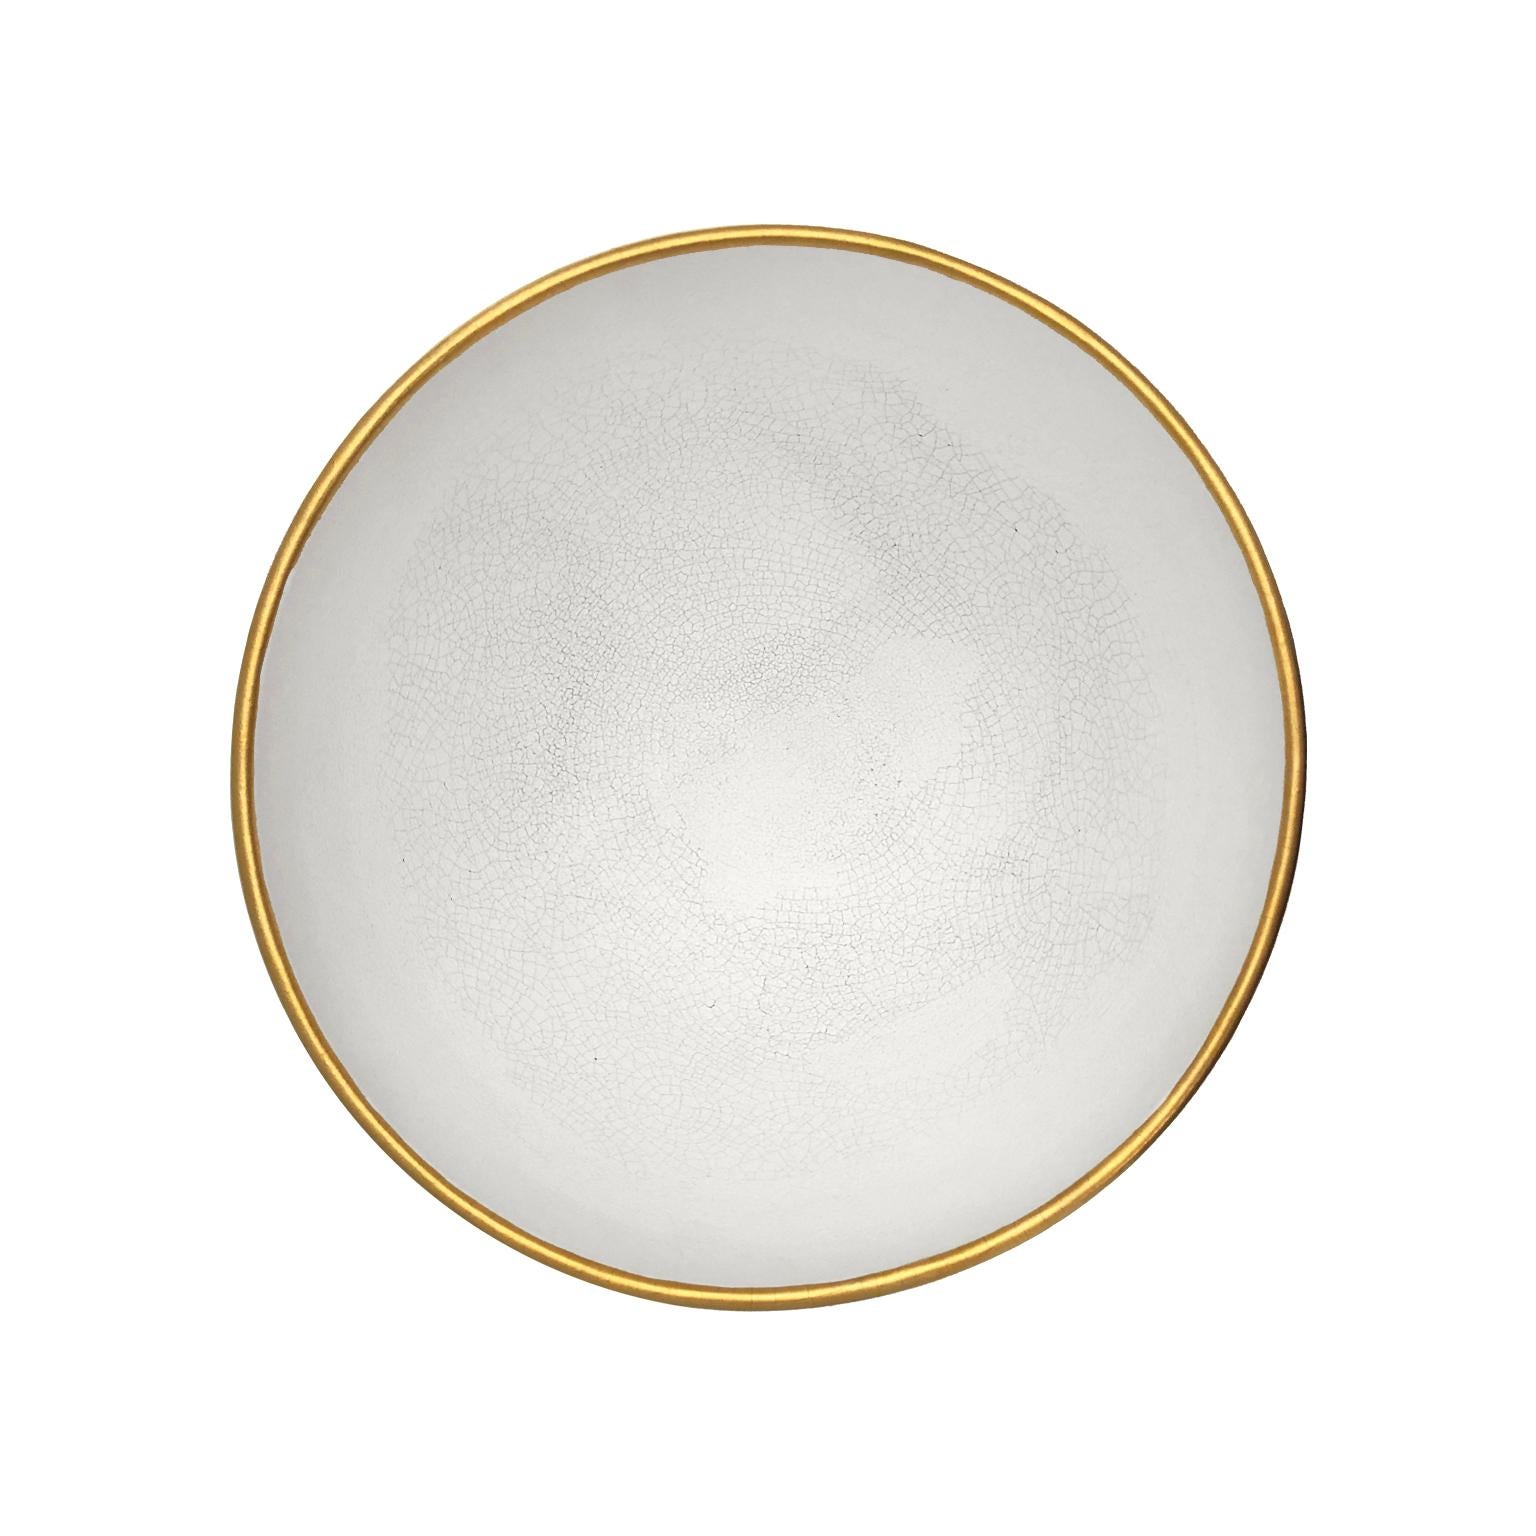 American Ceramic Bowl with White Crackle Glaze and 22K Matte Gold Band by Sandi Fellman For Sale